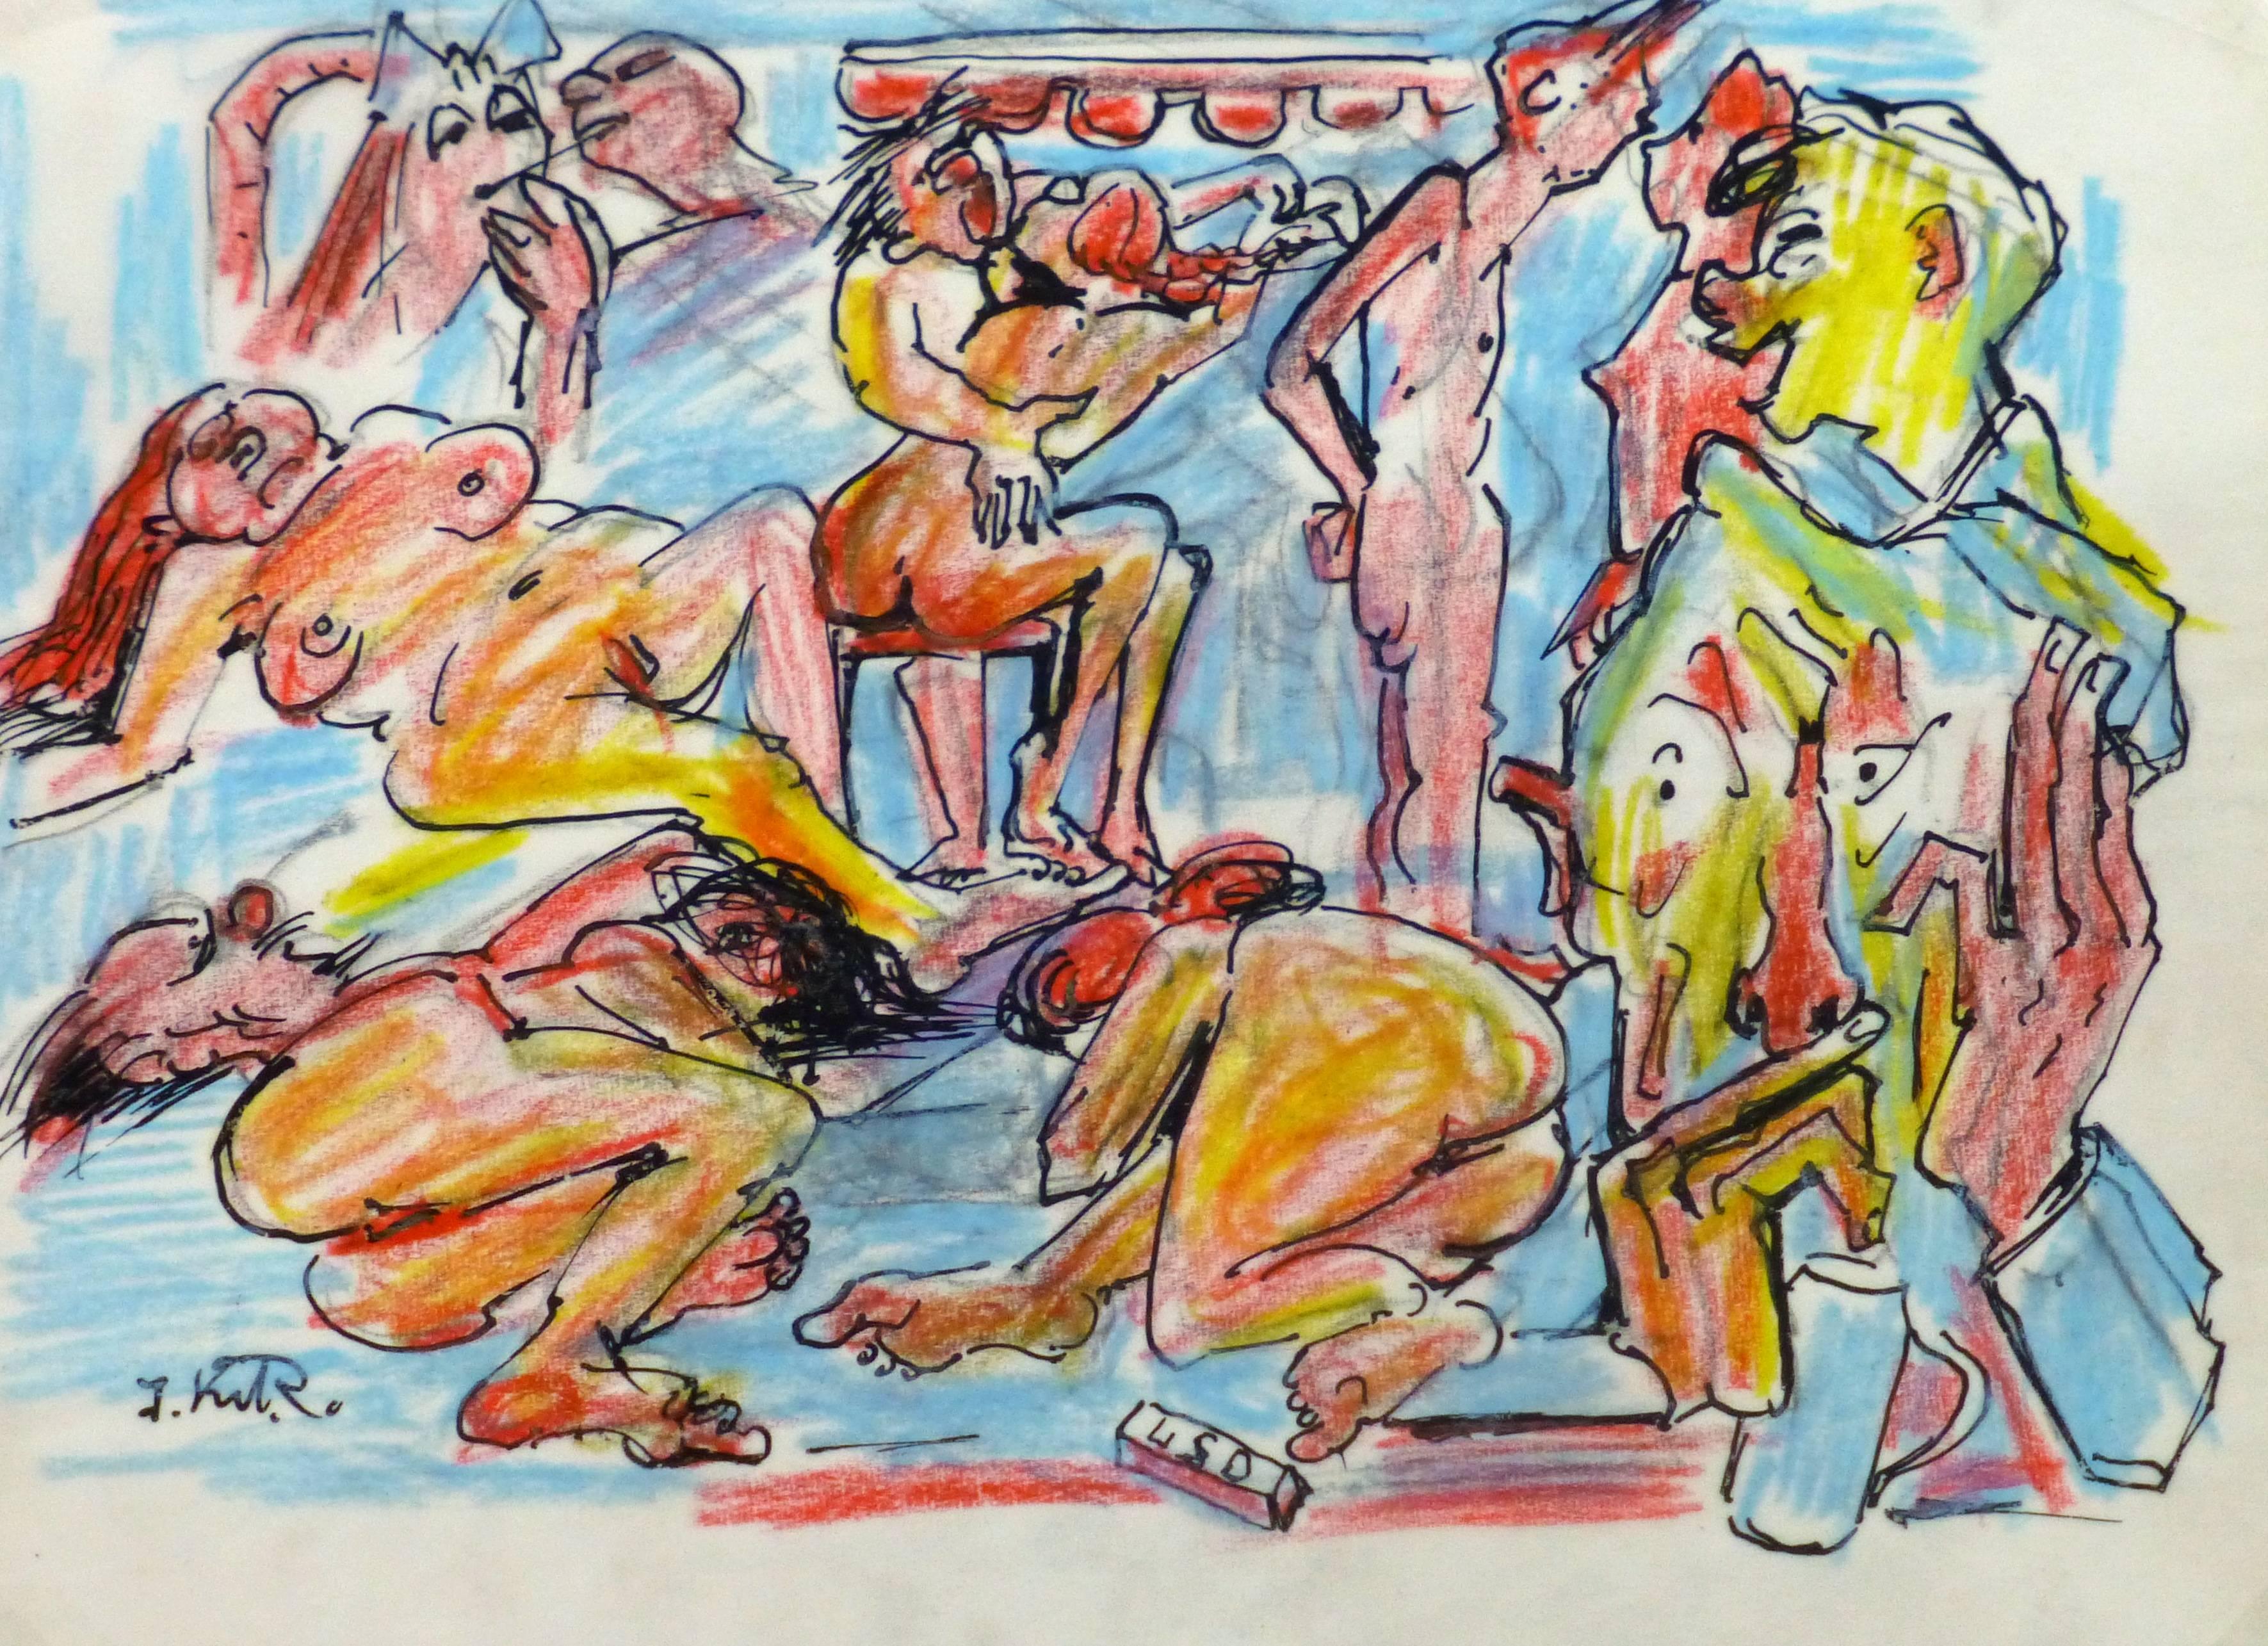 Colorful Ink & Pencil Drawing - Nude Uninhibited Gathering - Art by Unknown